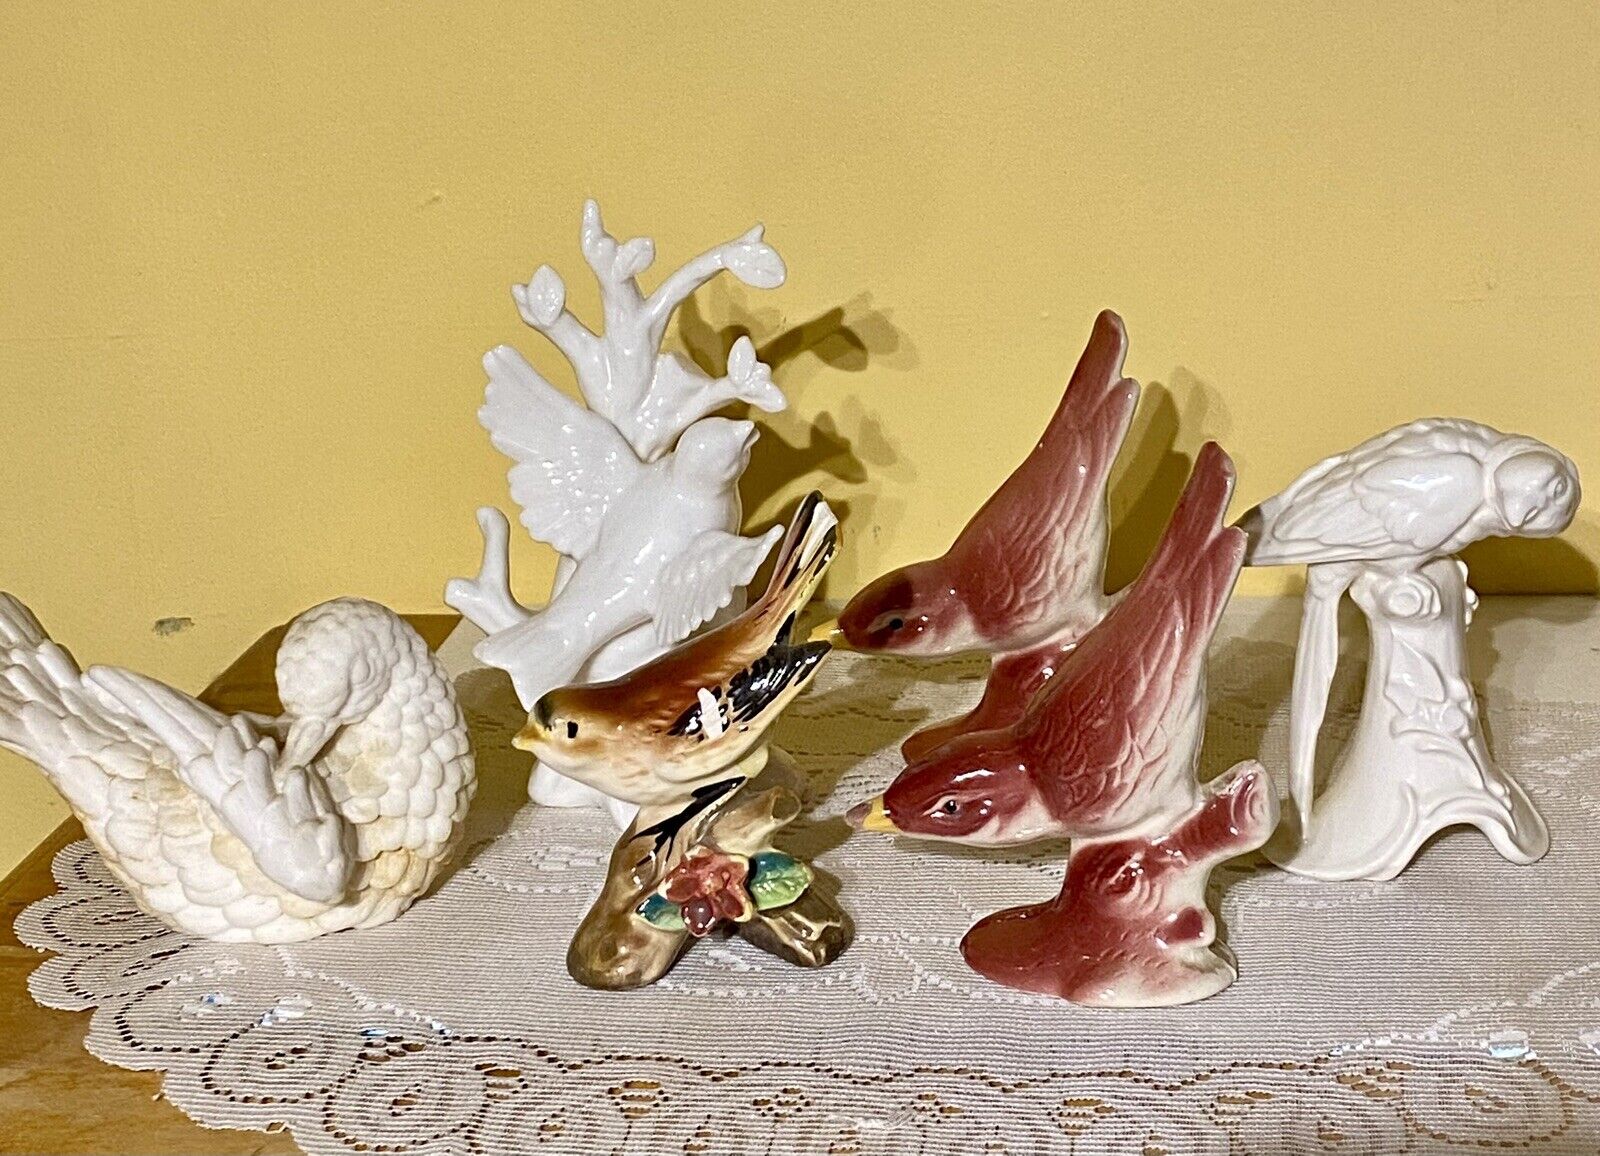 Lot of 6 Vintage Porcelain Ceramic Birds. One Made In Italy, One Made In Germany